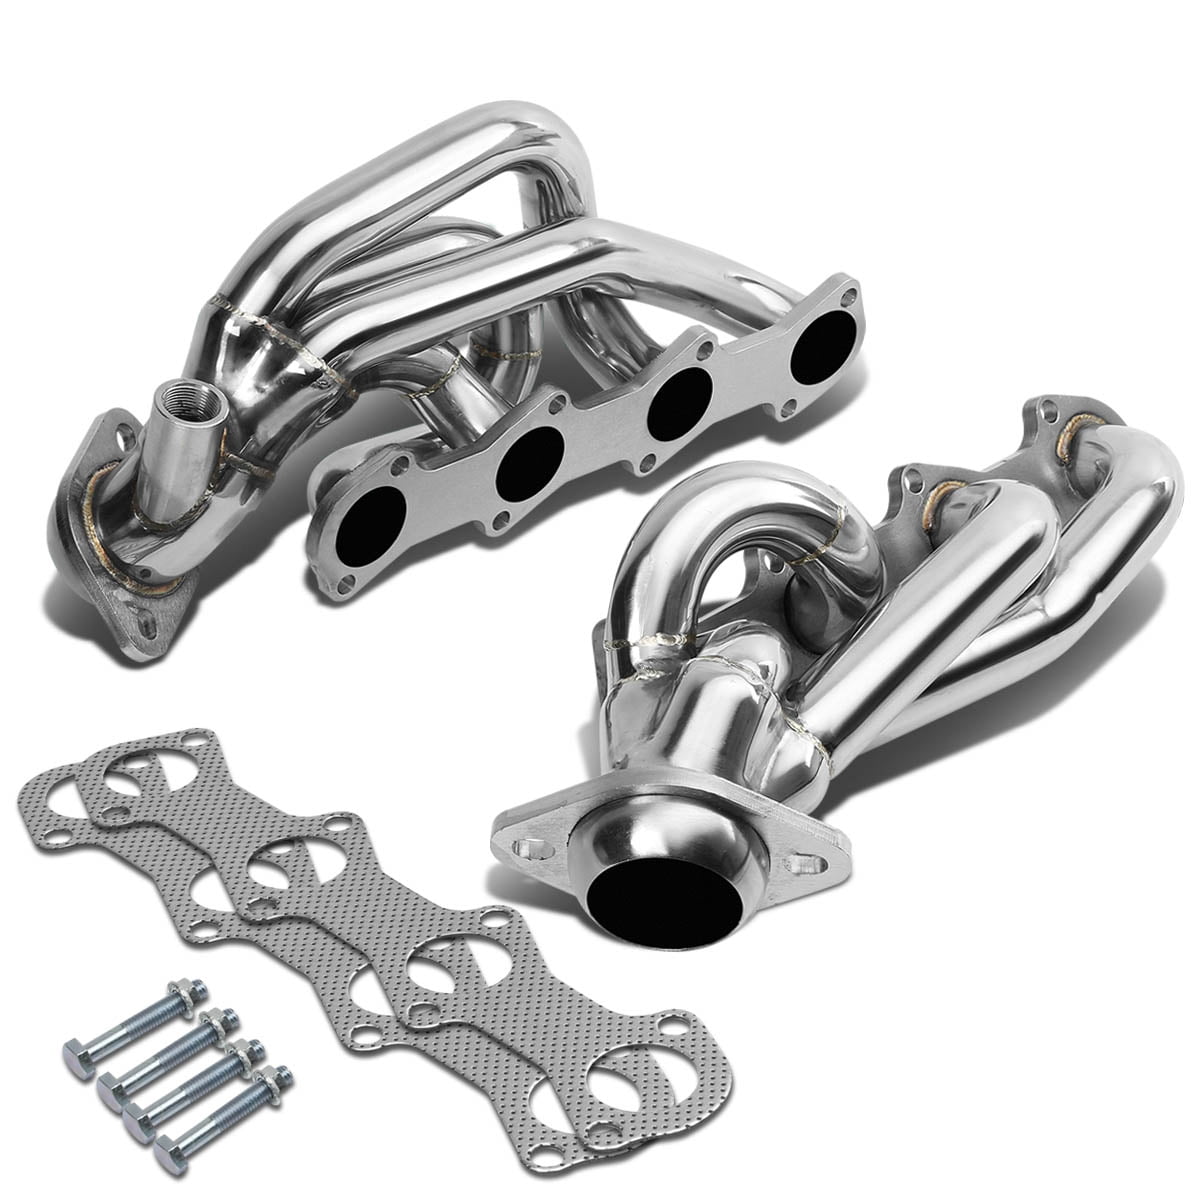 DNA Motoring HDS-F15097-V8 Stainless Steel Exhaust Header Manifold 